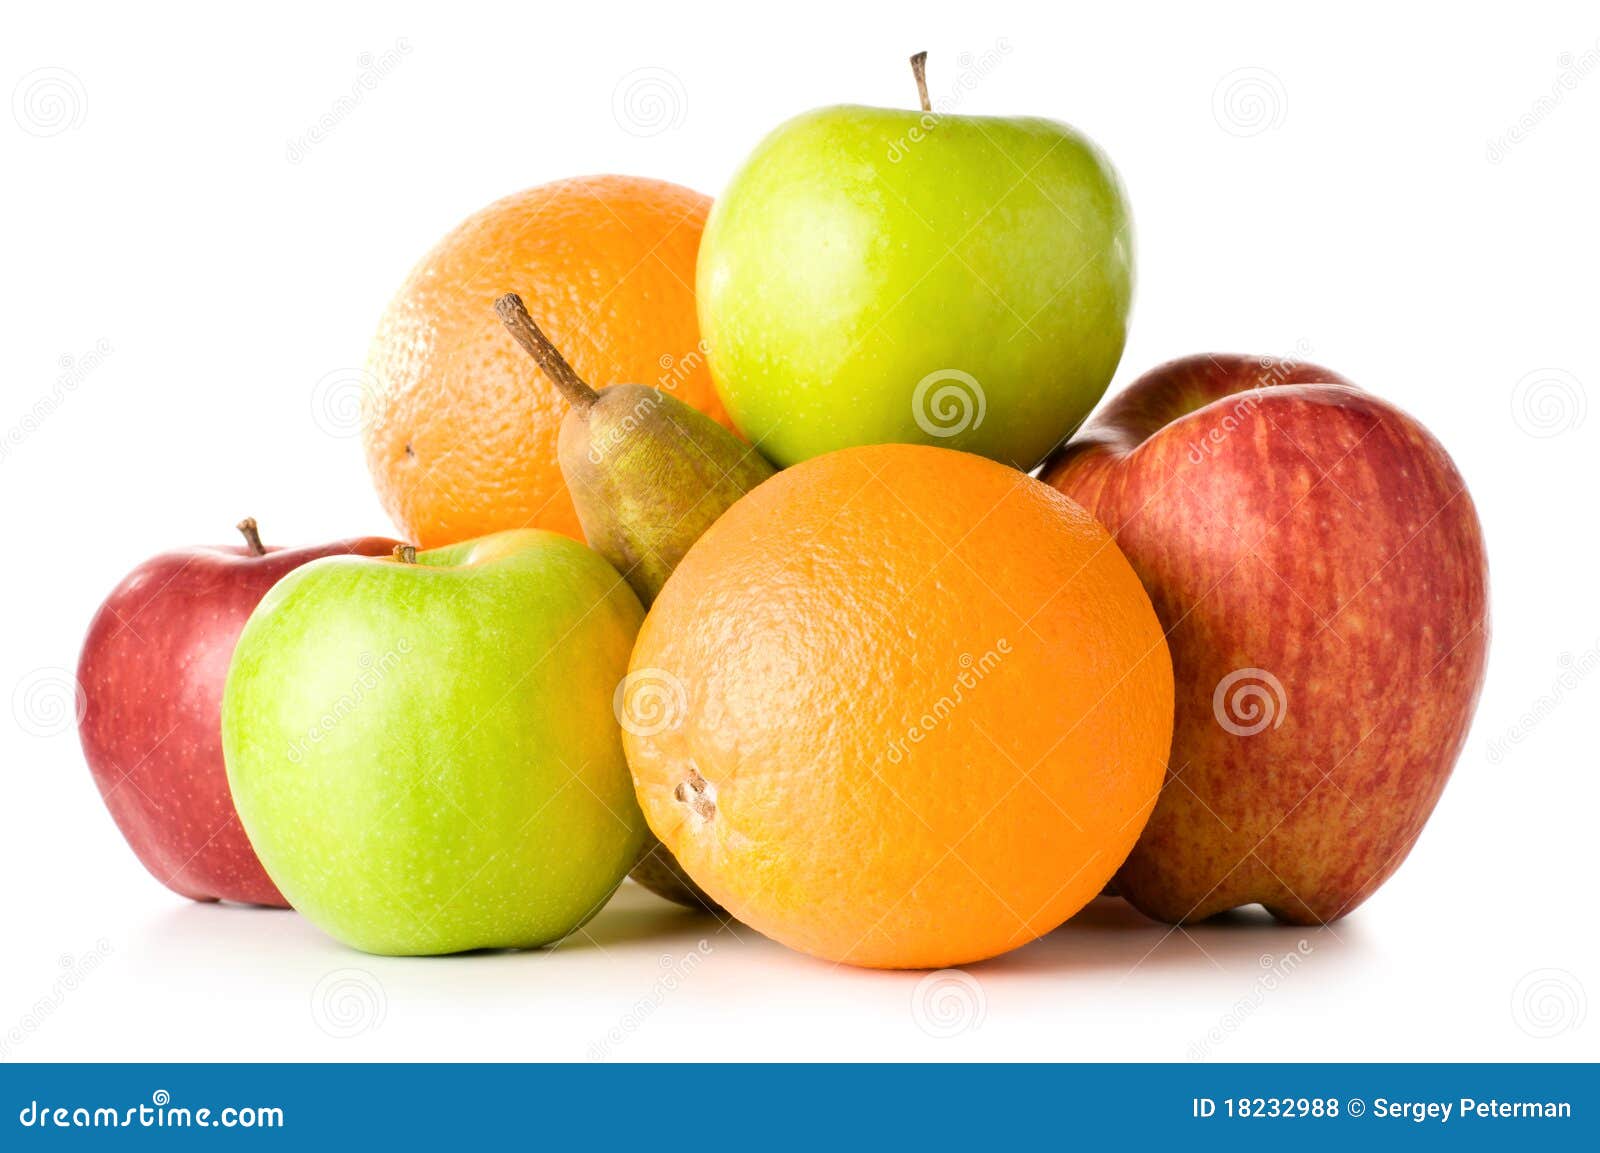 clipart of different fruits - photo #37